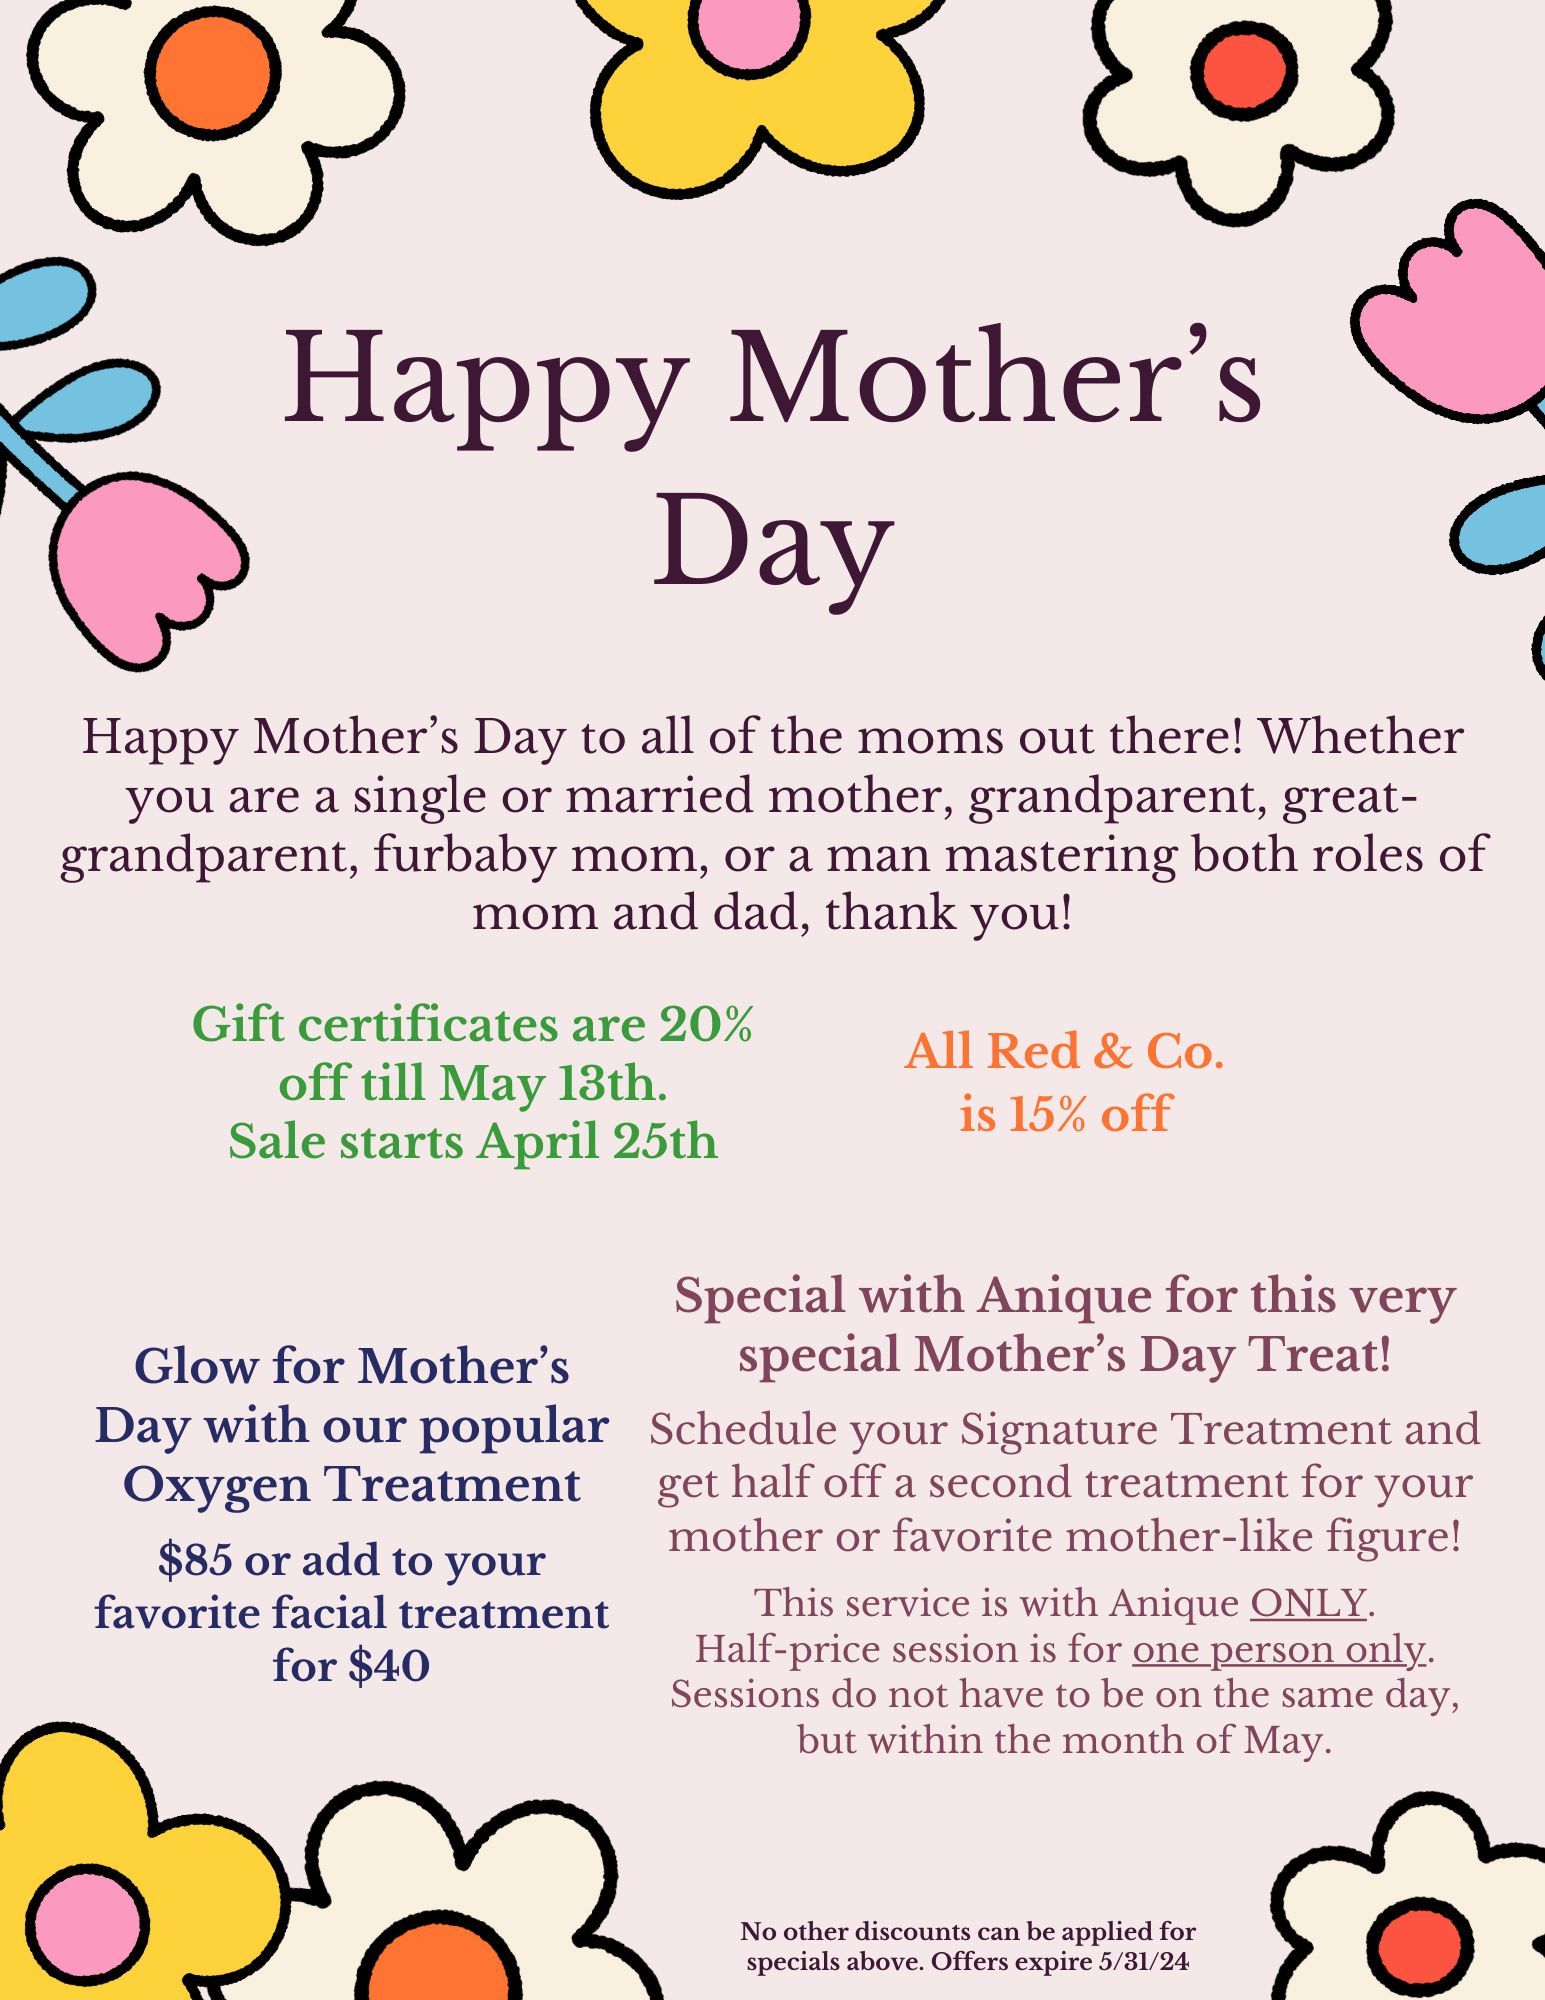 A poster that says happy mother's day on it